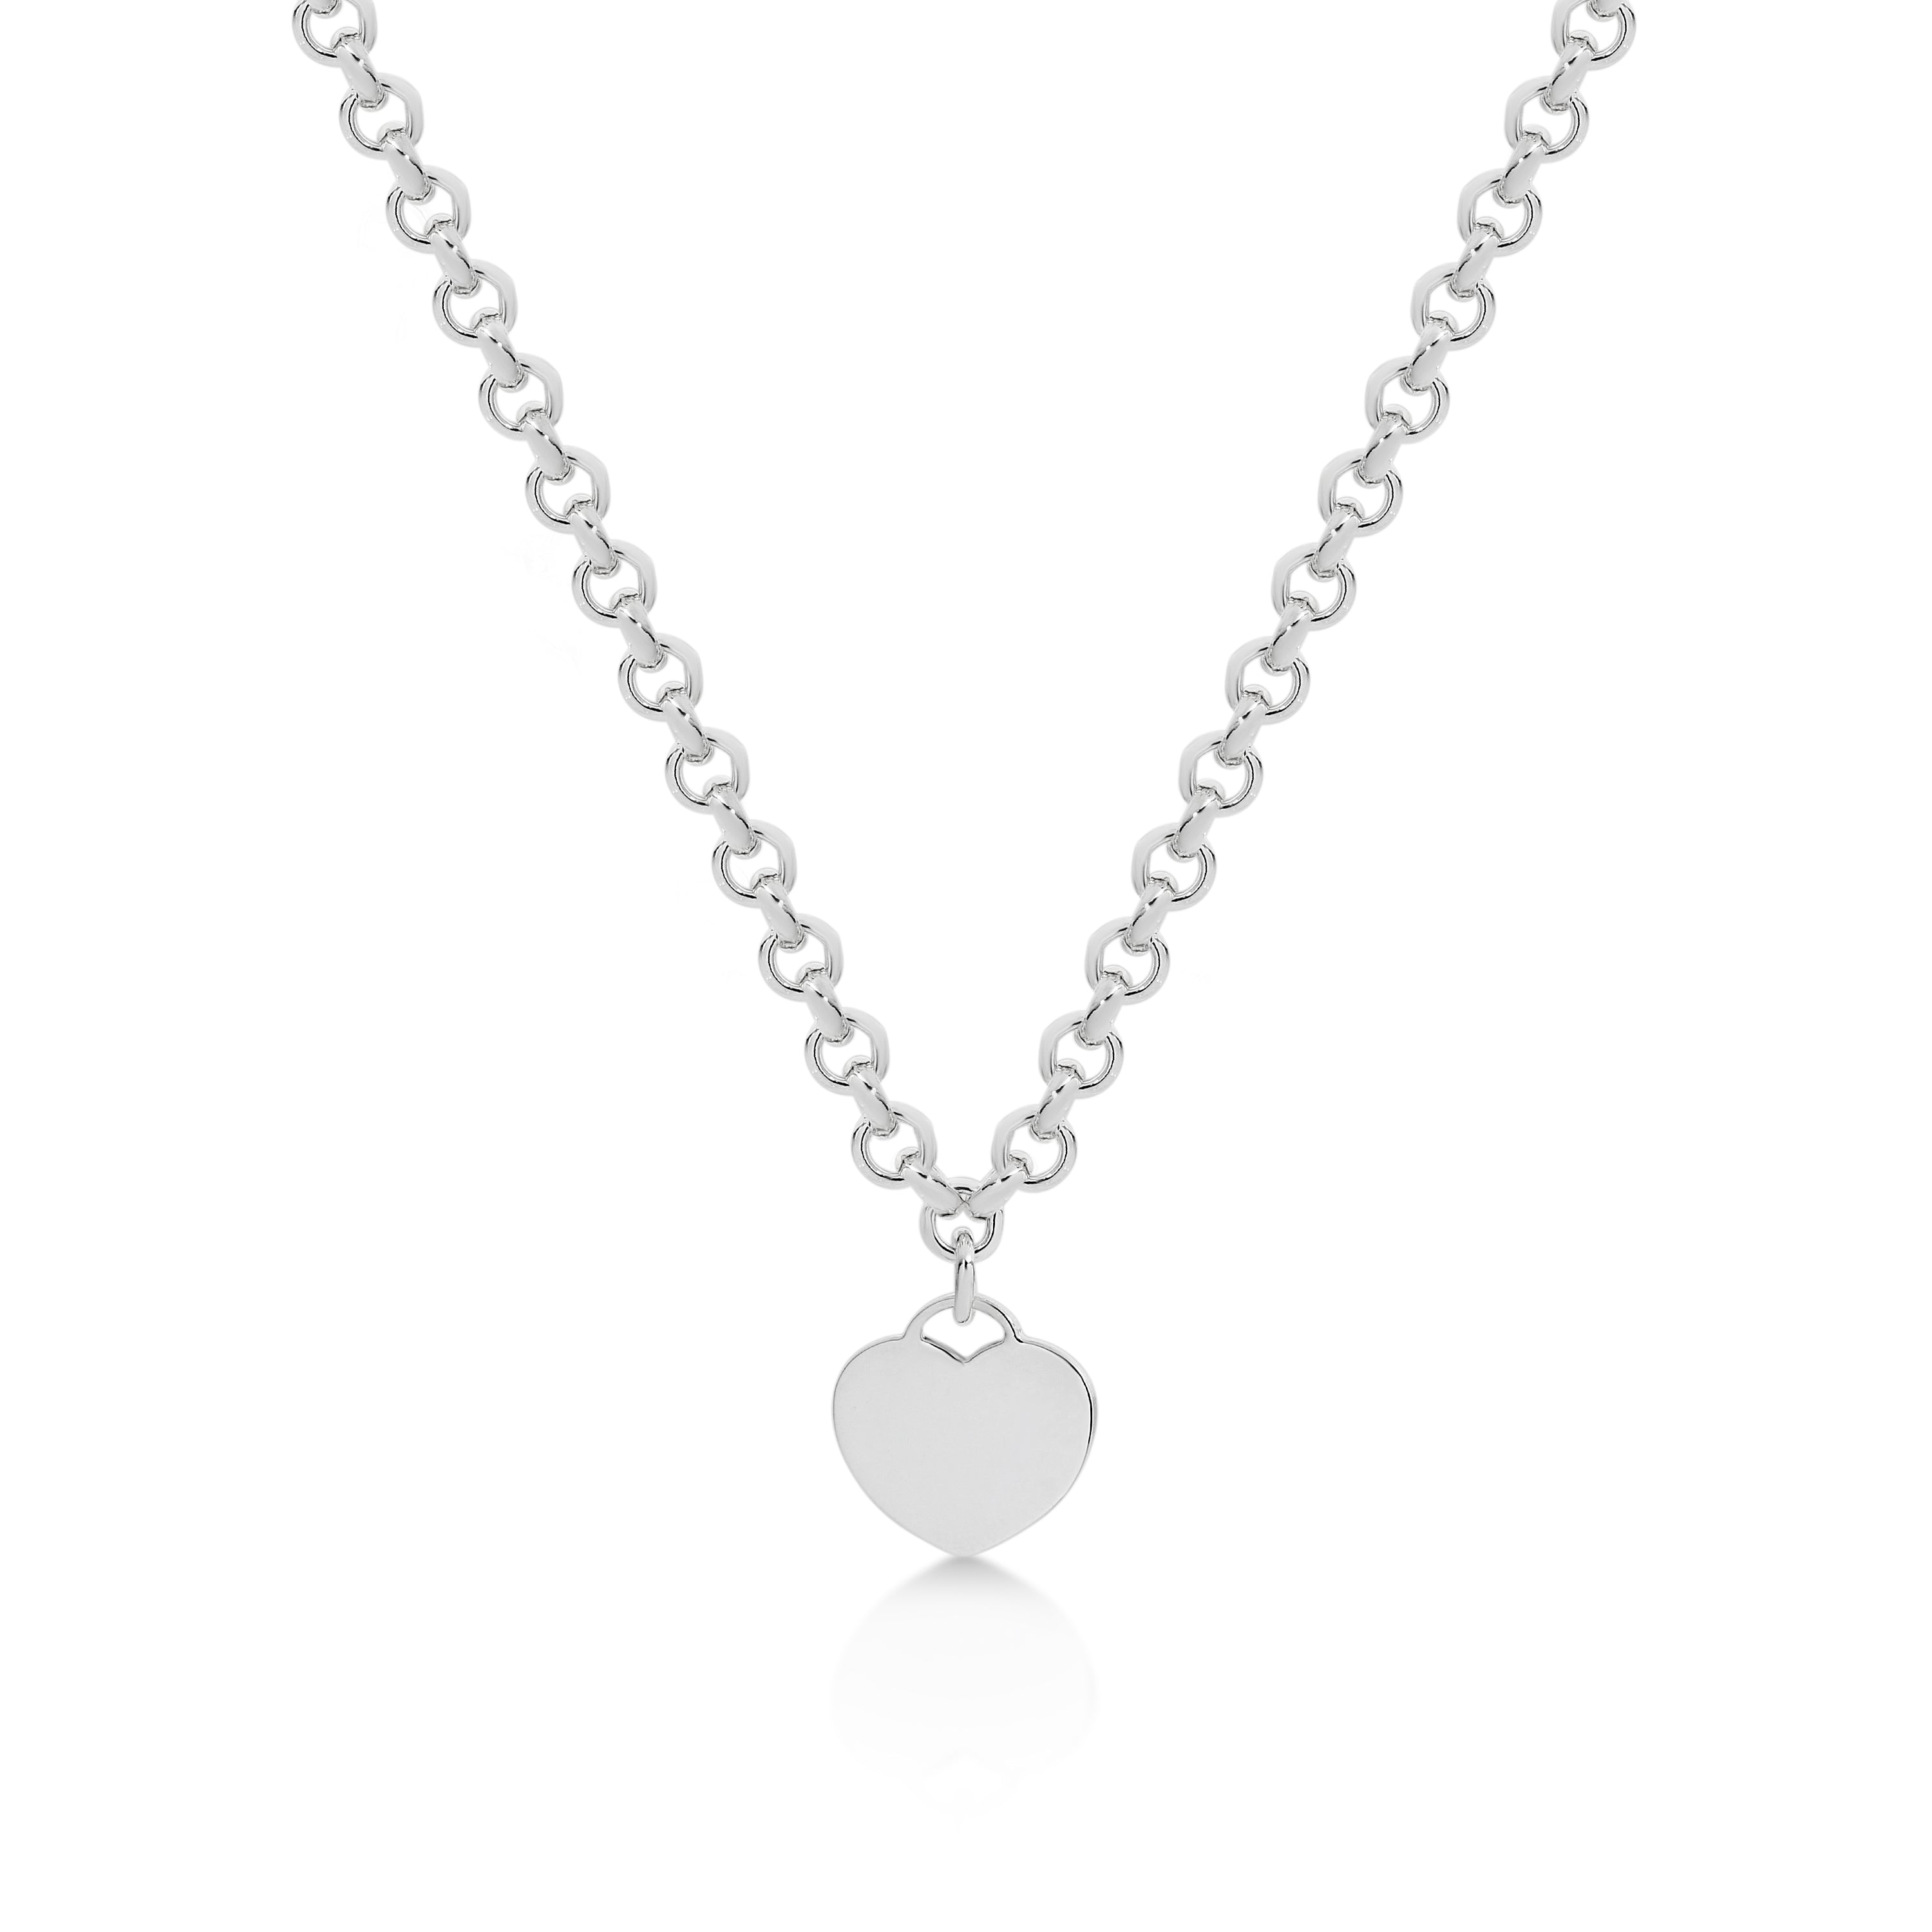 MP5919 Sterling silver heart tag necklace 45cm 9.30gm